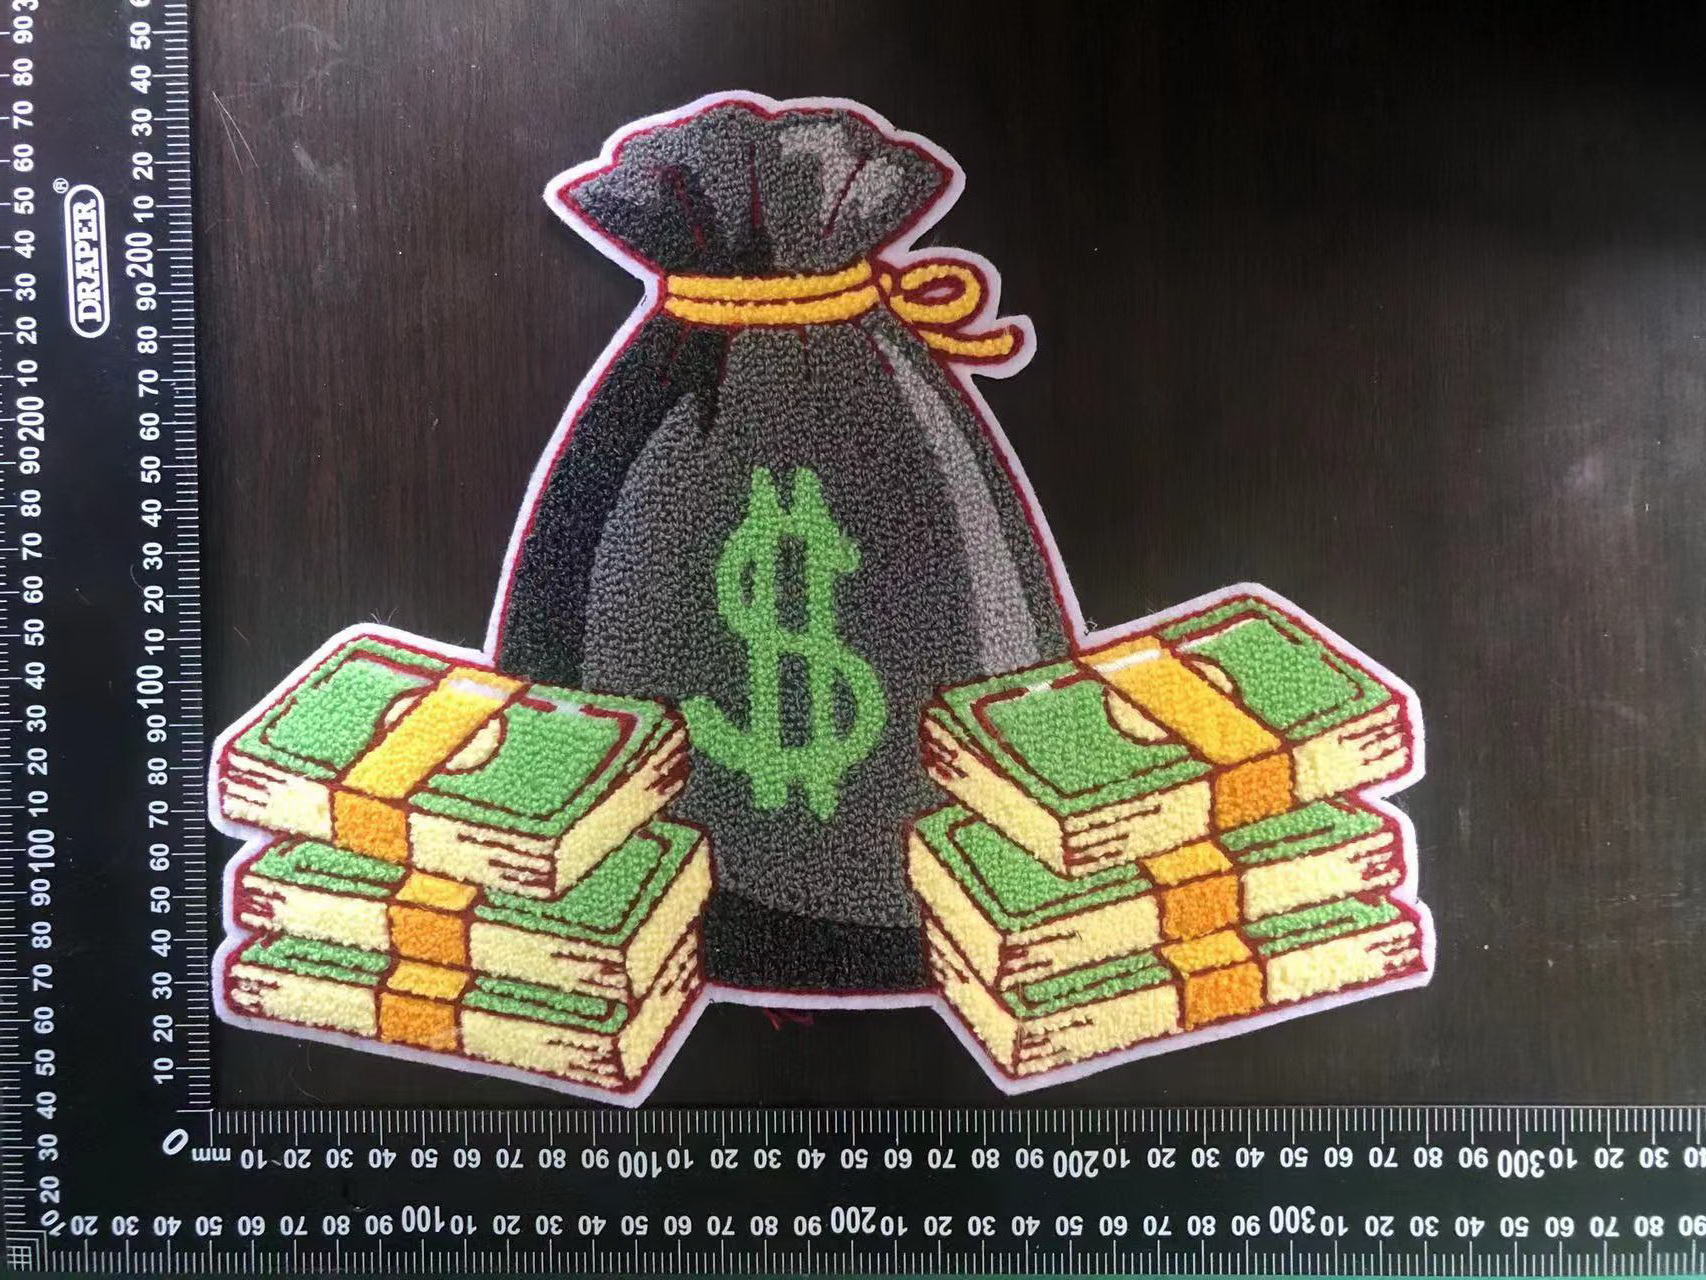 Dollar chenille patch 